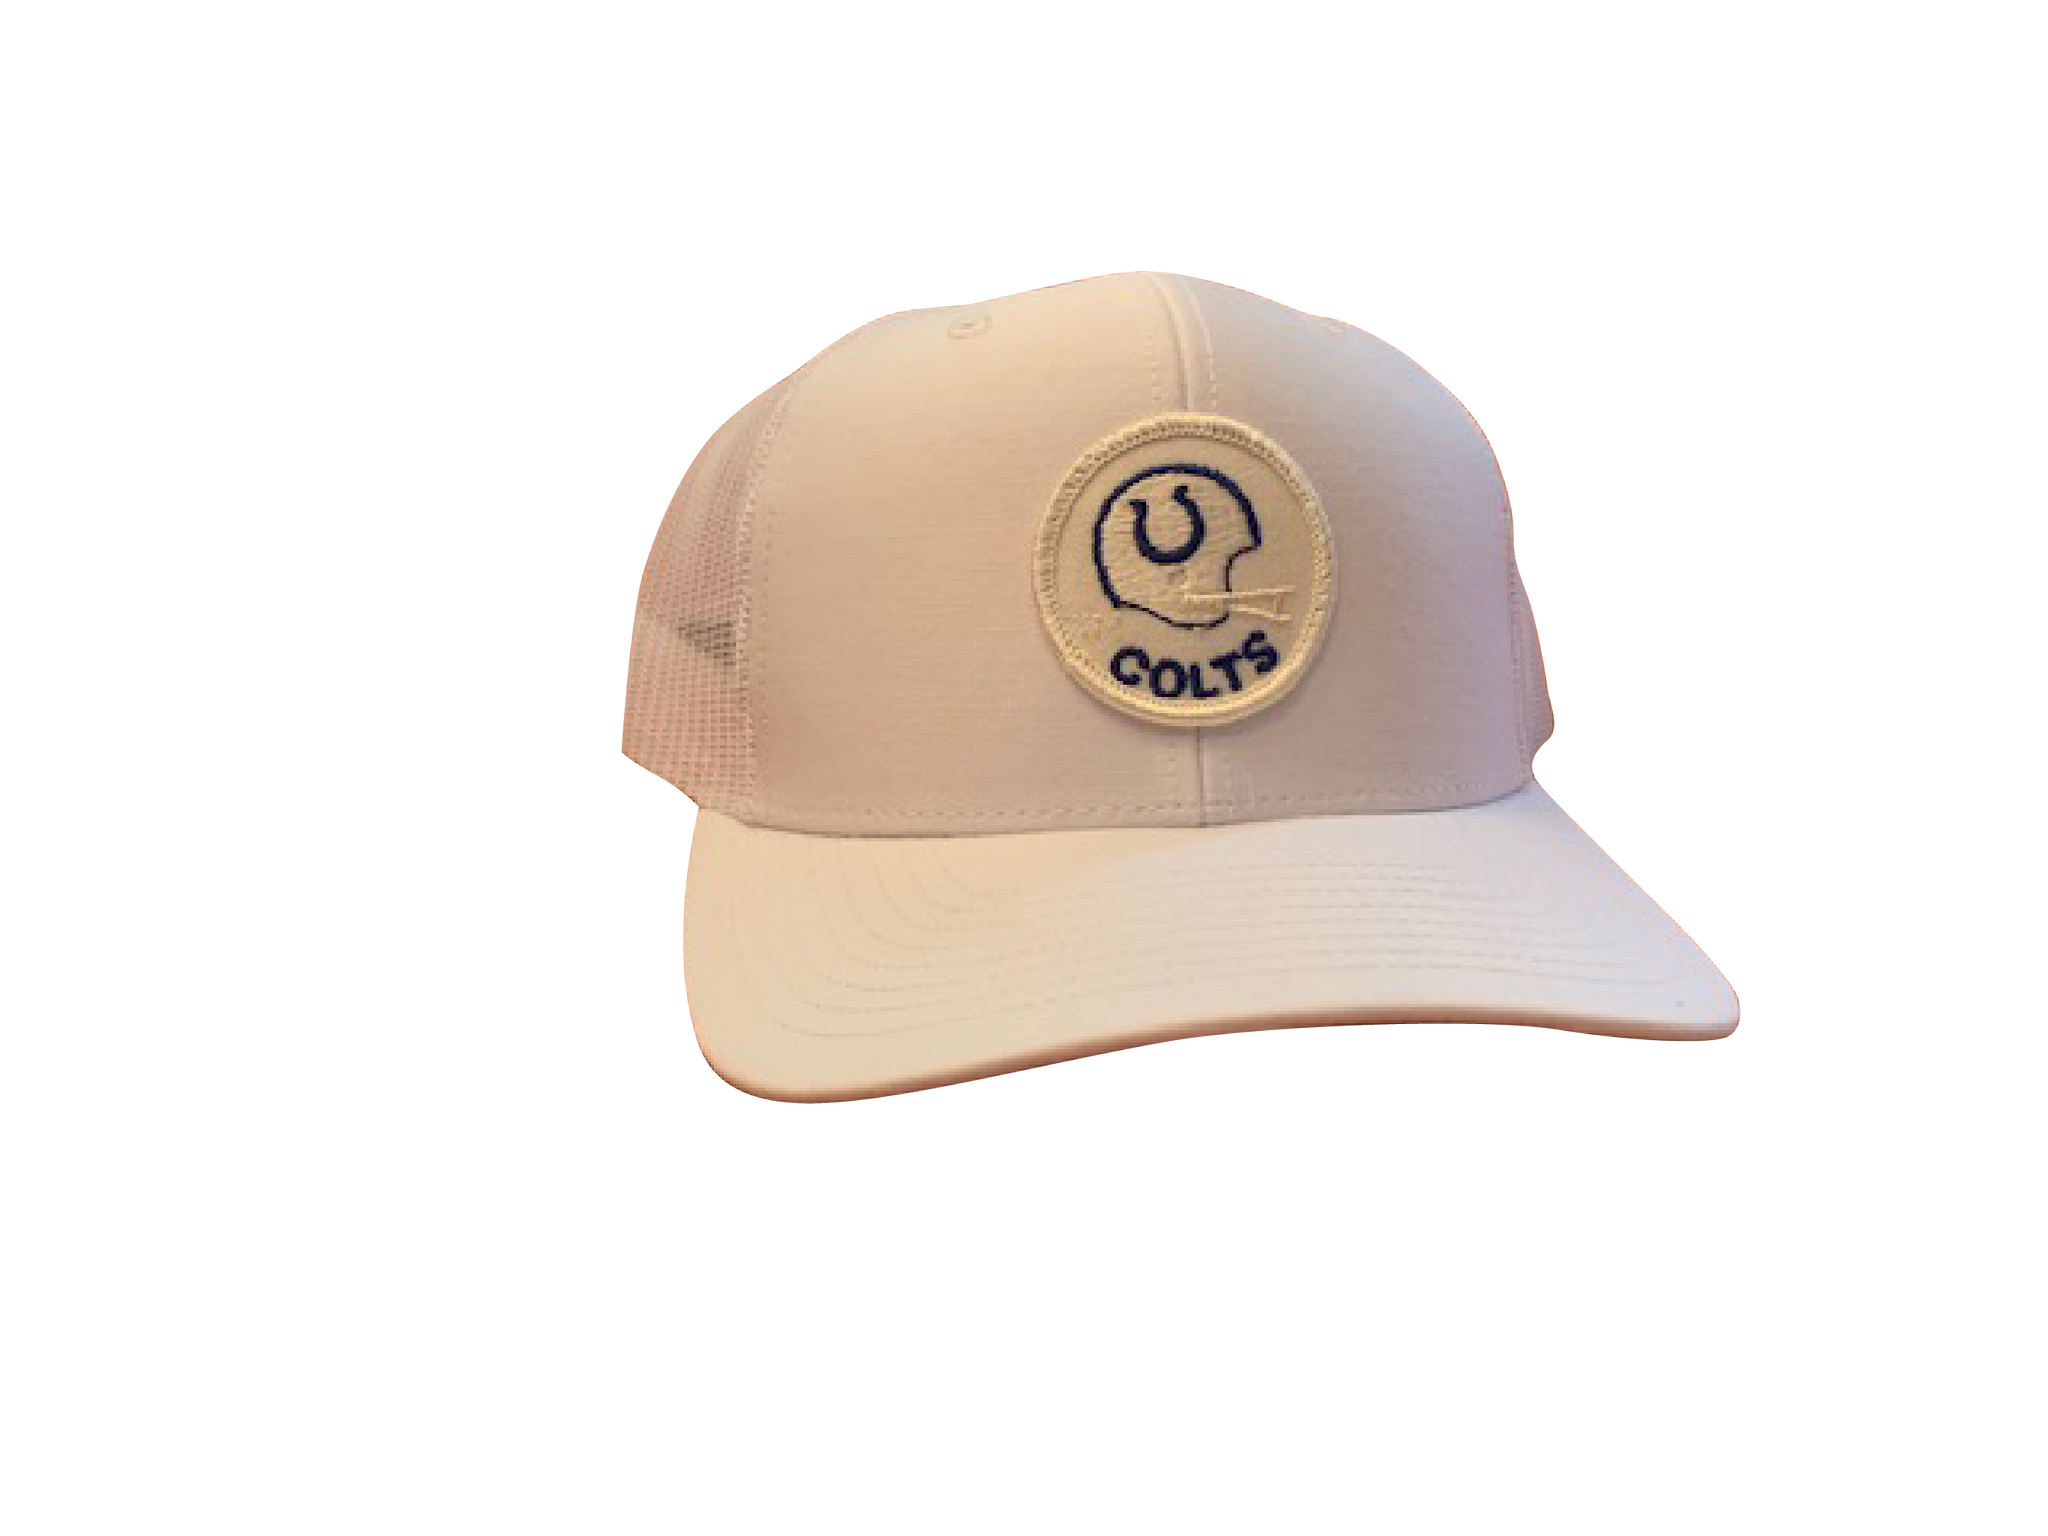 Indianapolis (Baltimore) Colts Patch Trucker Cap - White